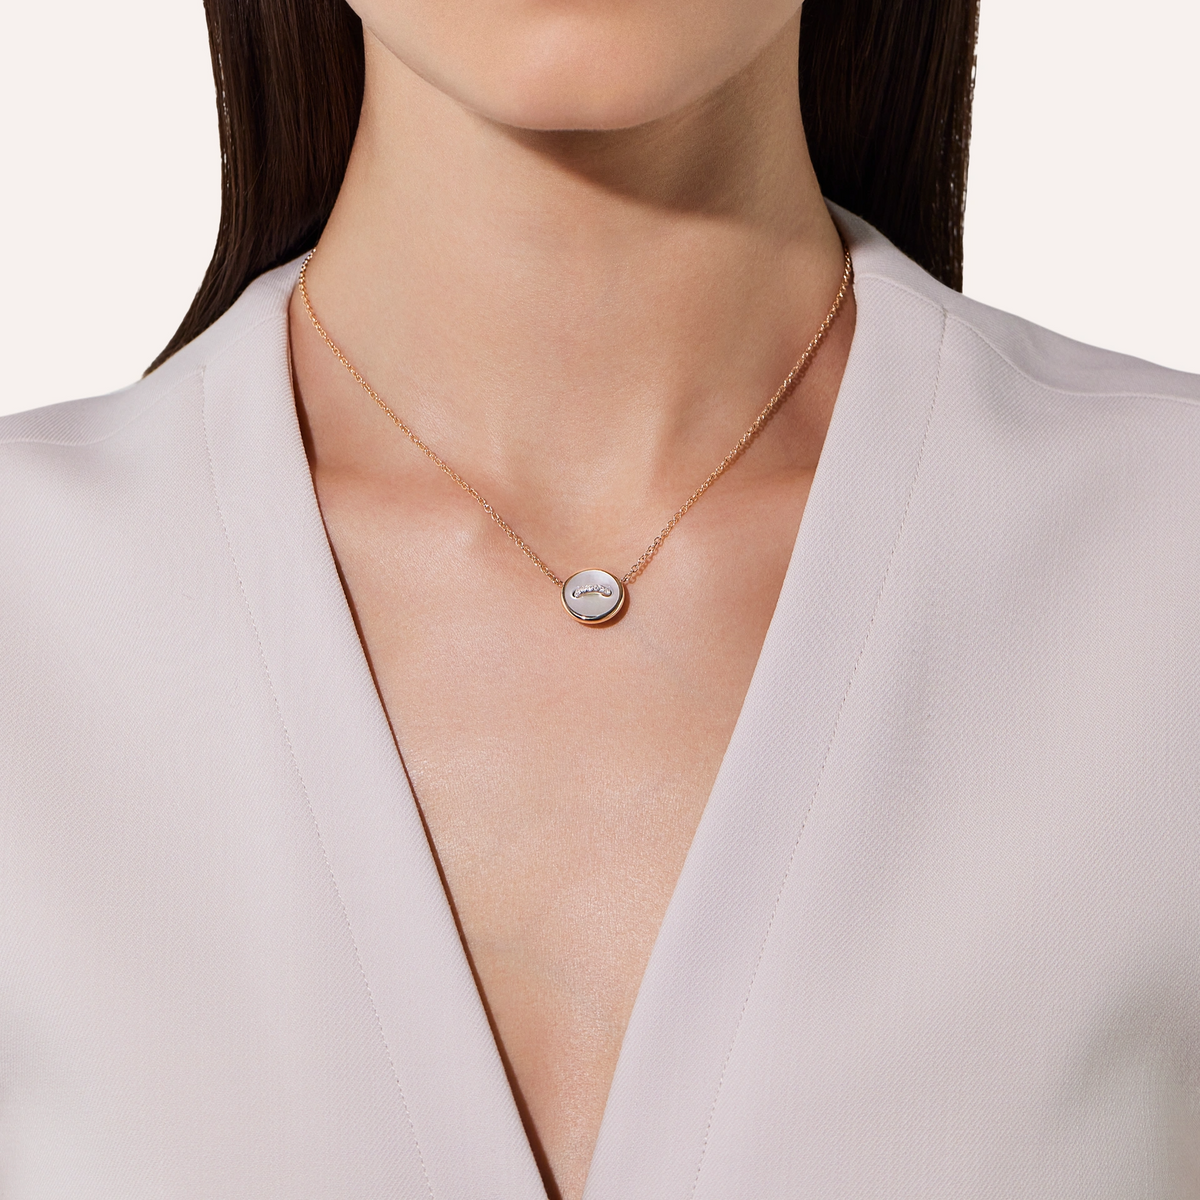 Pomellato_s Mother of Pearl Diamond Necklace worn on Model